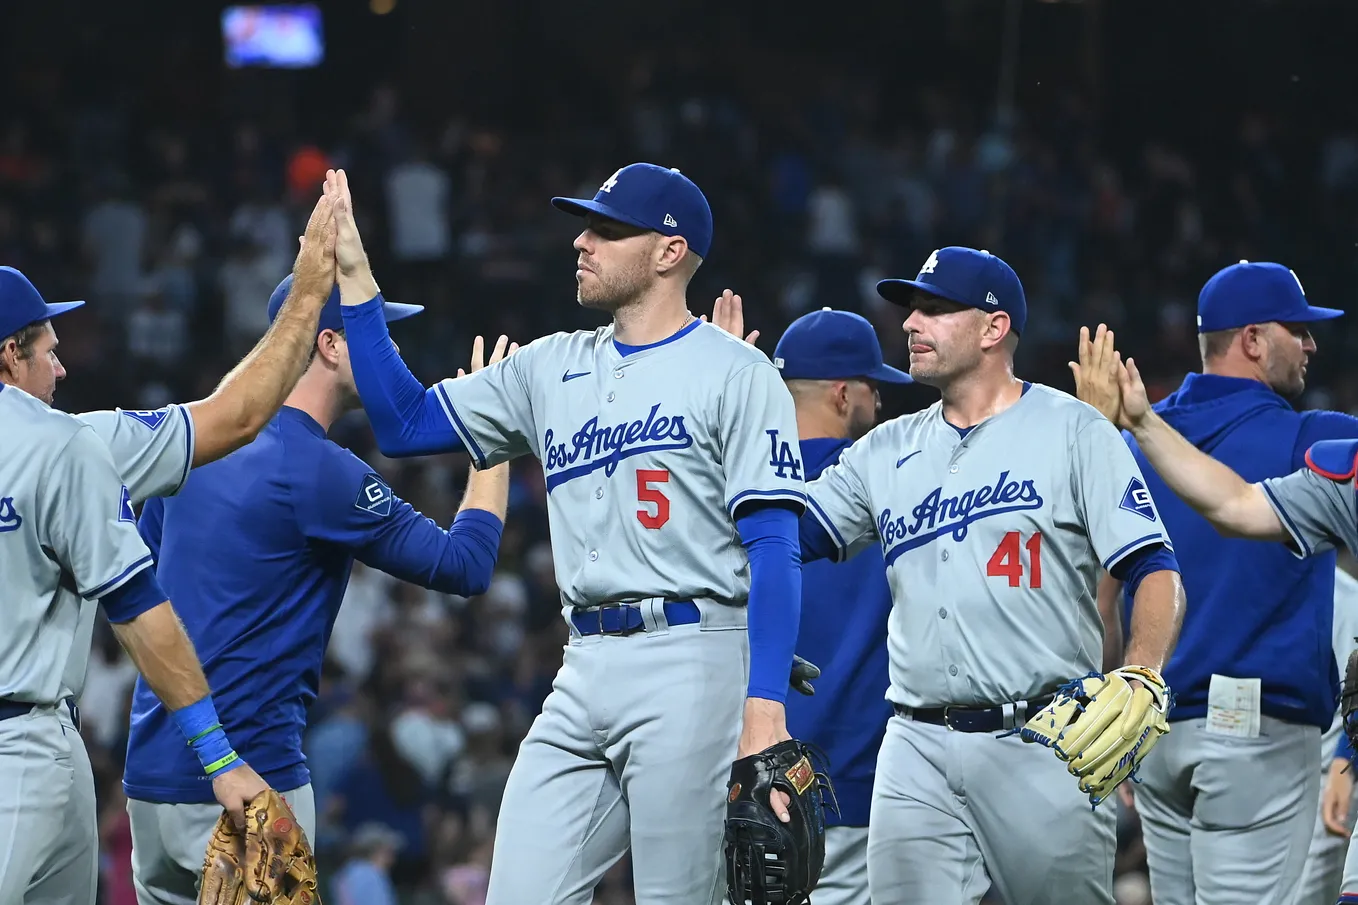 The Dodgers maneuver their way to a much-needed victory